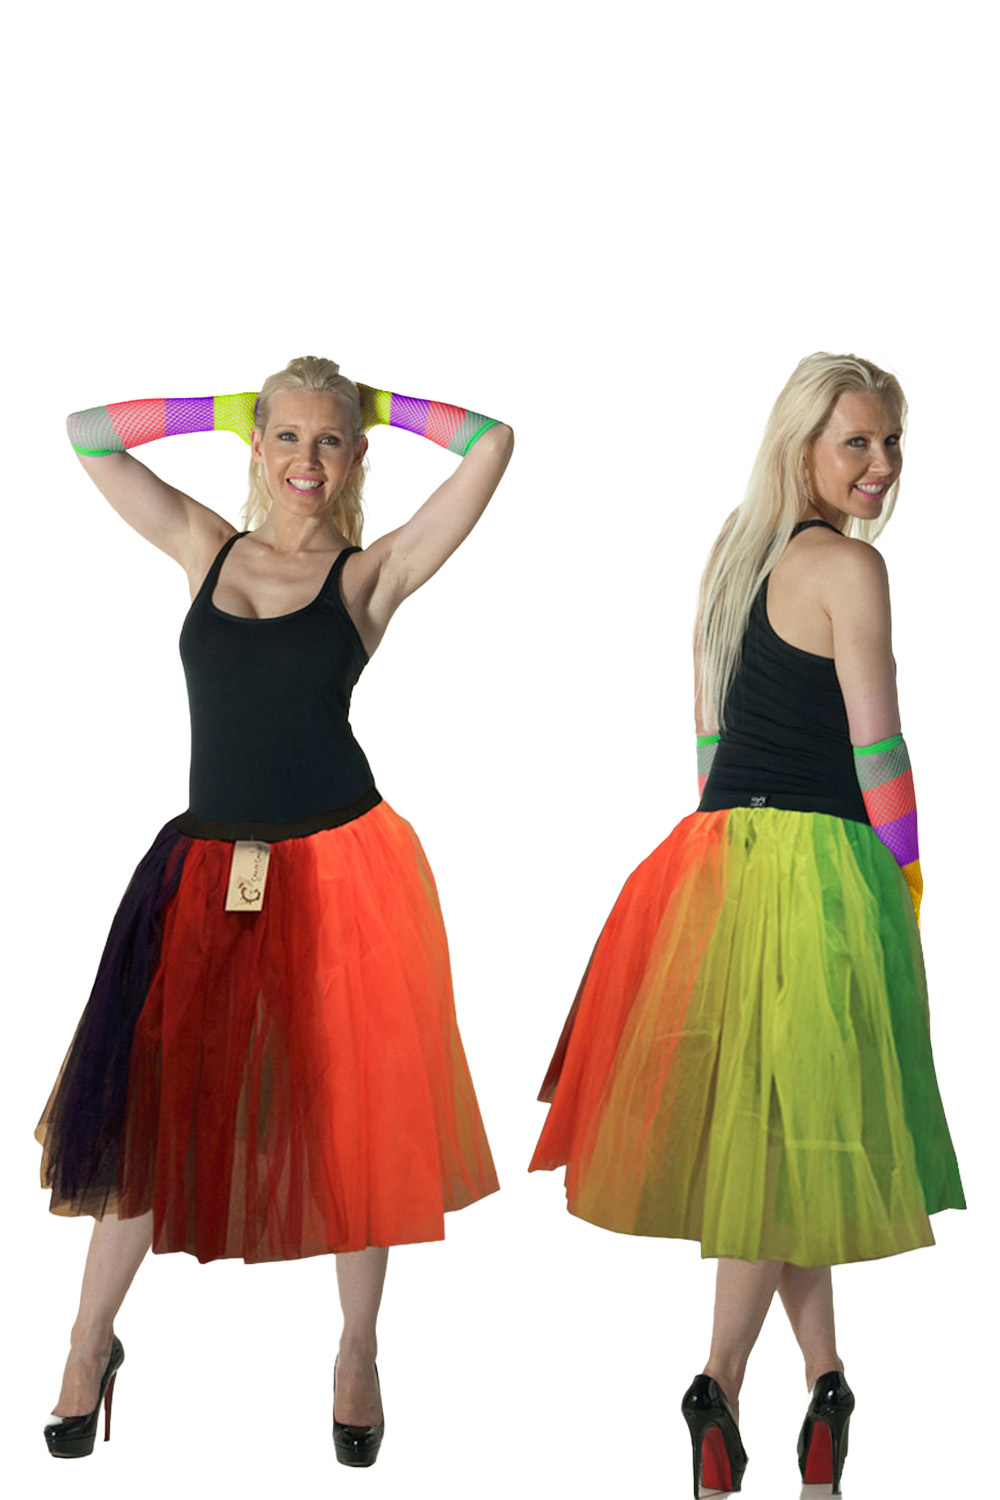 Wickedfun Adult 3 Layer Rainbow Tutu Skirt (Approximately 26 Inches Long)